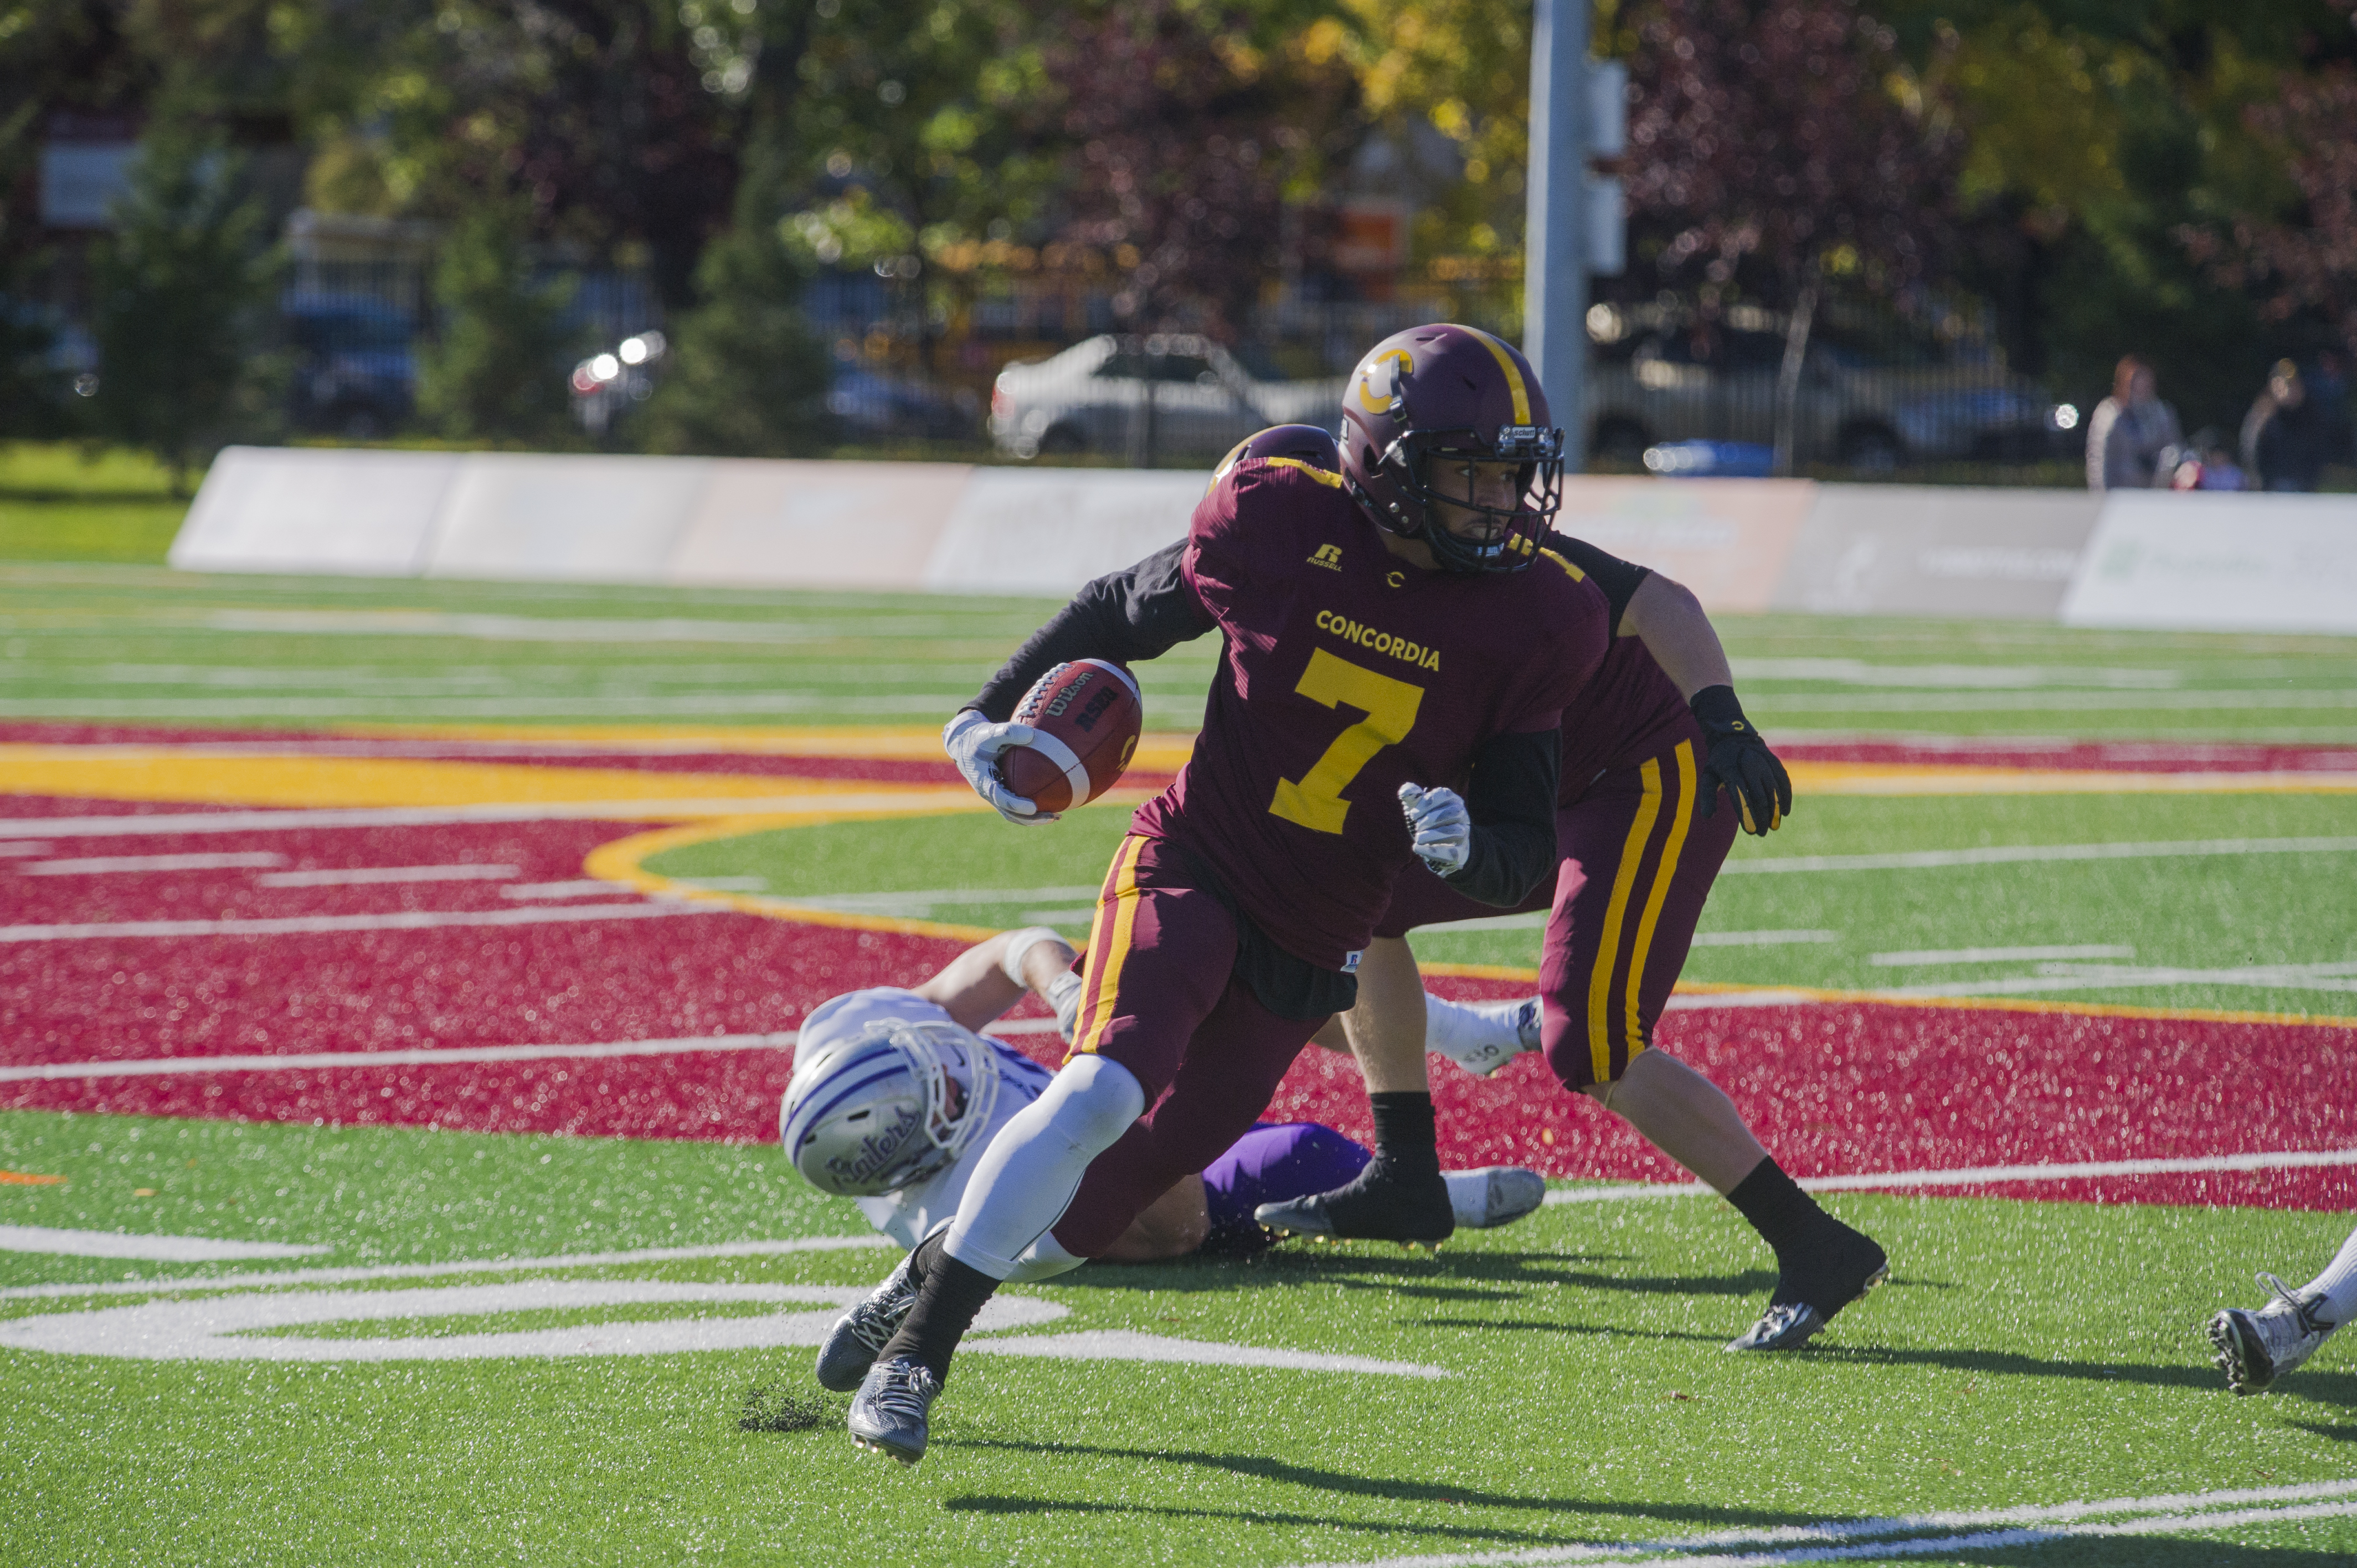 Stingers receiver James Tyrell taking to the open field in Saturday game vs Bishops.  Photo by Andrej Ivanov.